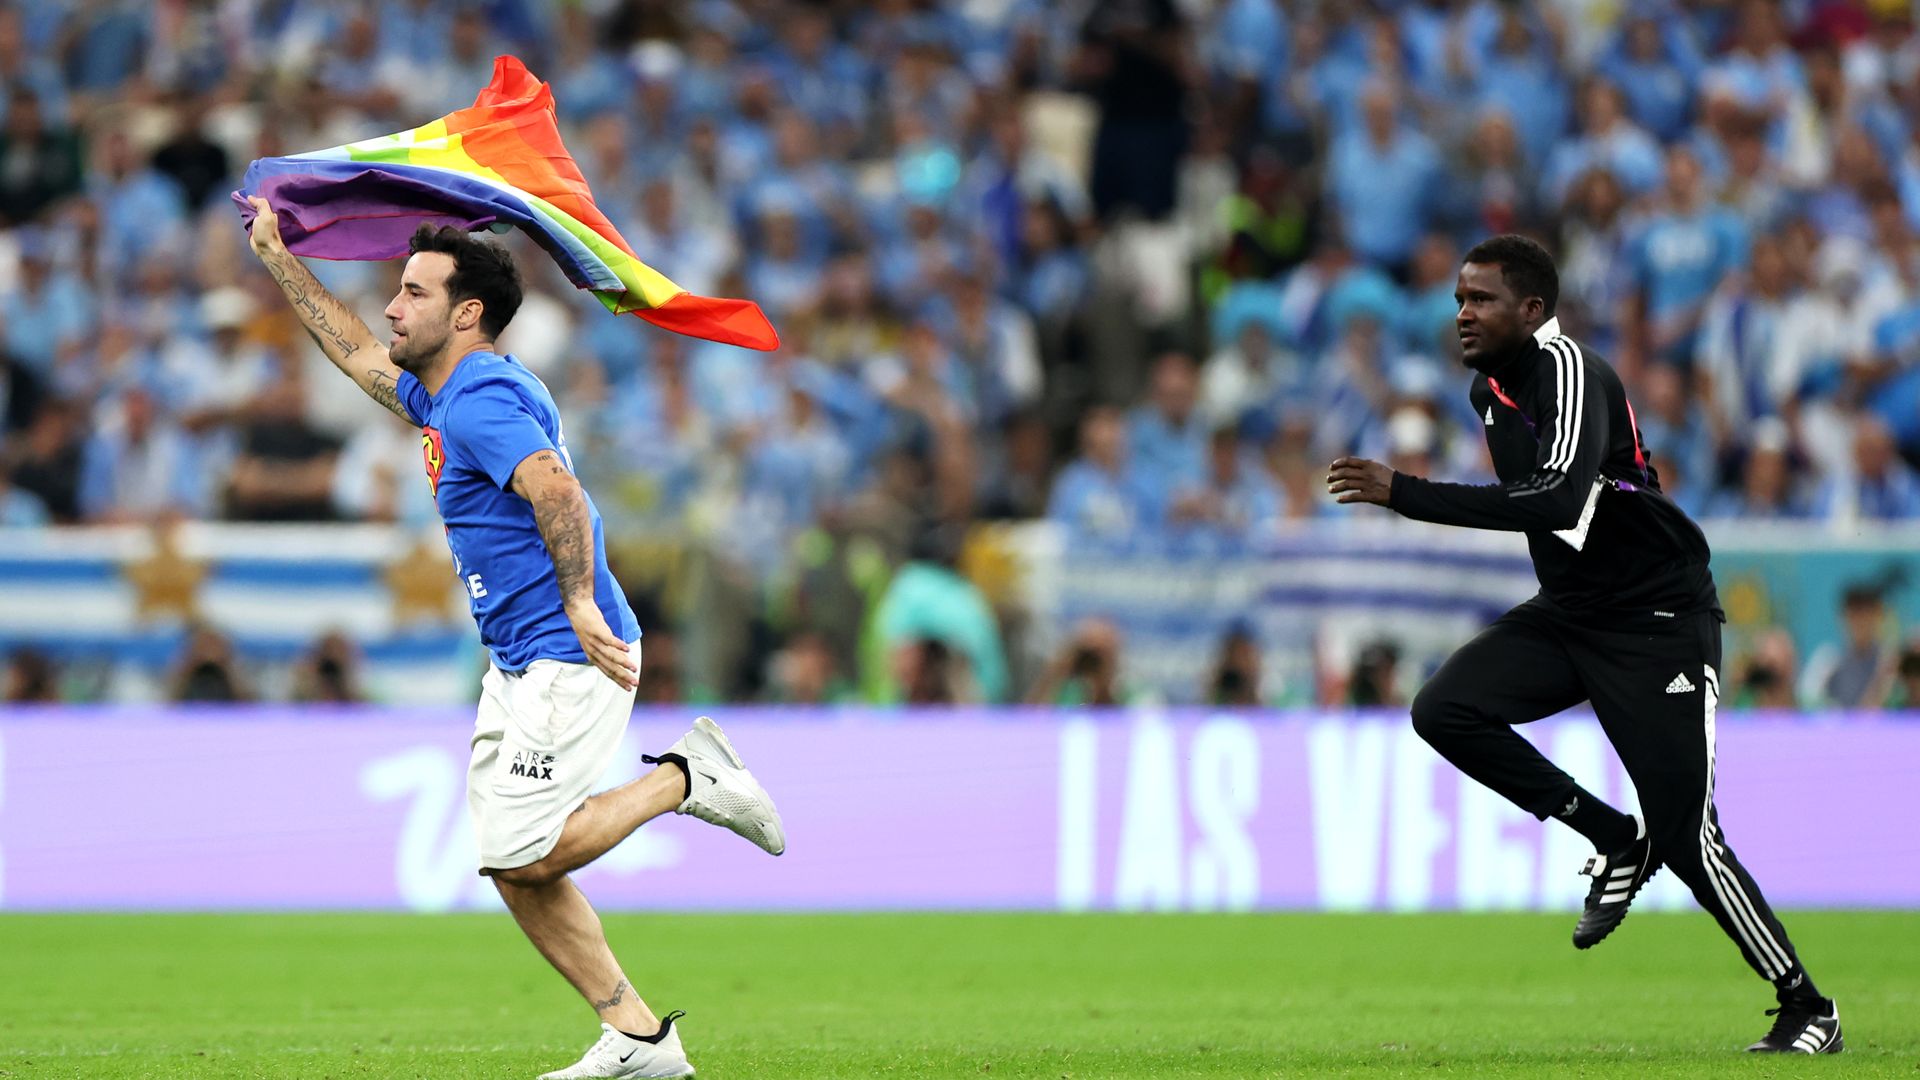 Photo of a protester holding a rainbow flag runs across the pitch at a World Cup soccer match